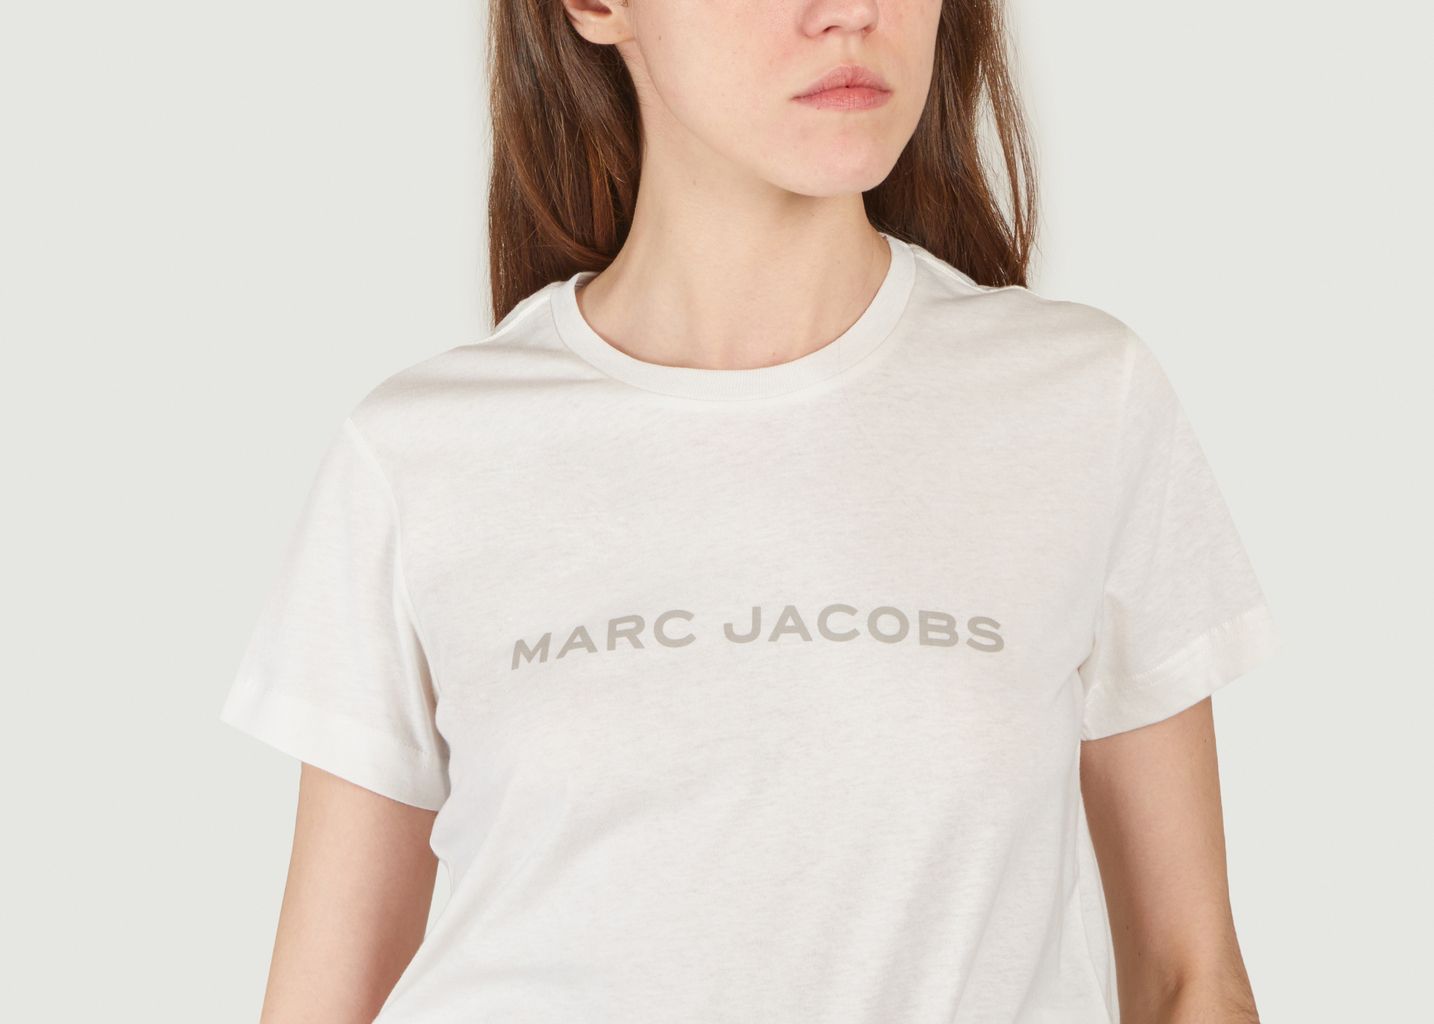 The T-Shirt - Marc Jacobs